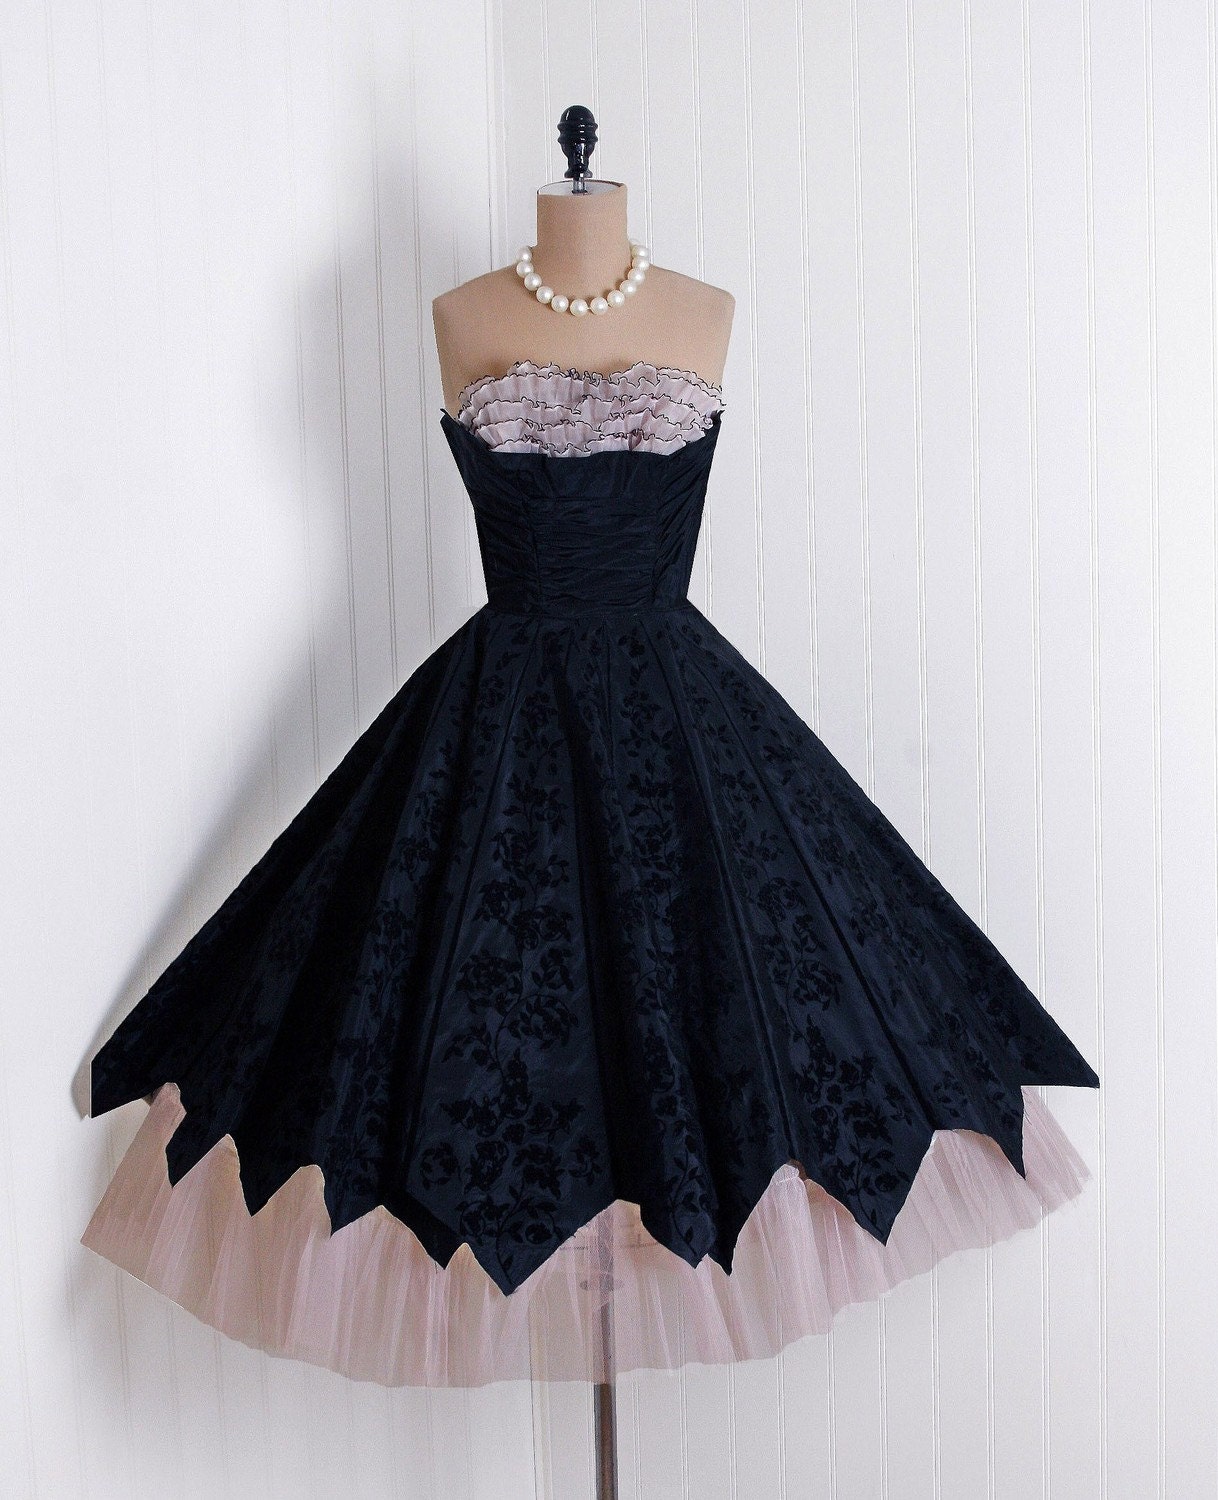 1950's Vintage Black Floral-Flocked Taffeta and Champagne-Pink Ruffle Chiffon-Couture Sweetheart Shelf-Bust Strapless Nipped-Waist Princess Ballerina-Cupcake Rockabilly Zig-Zag Tulle Circle-Skirt Bombshell Formal Wedding Evening Cocktail Party Dress